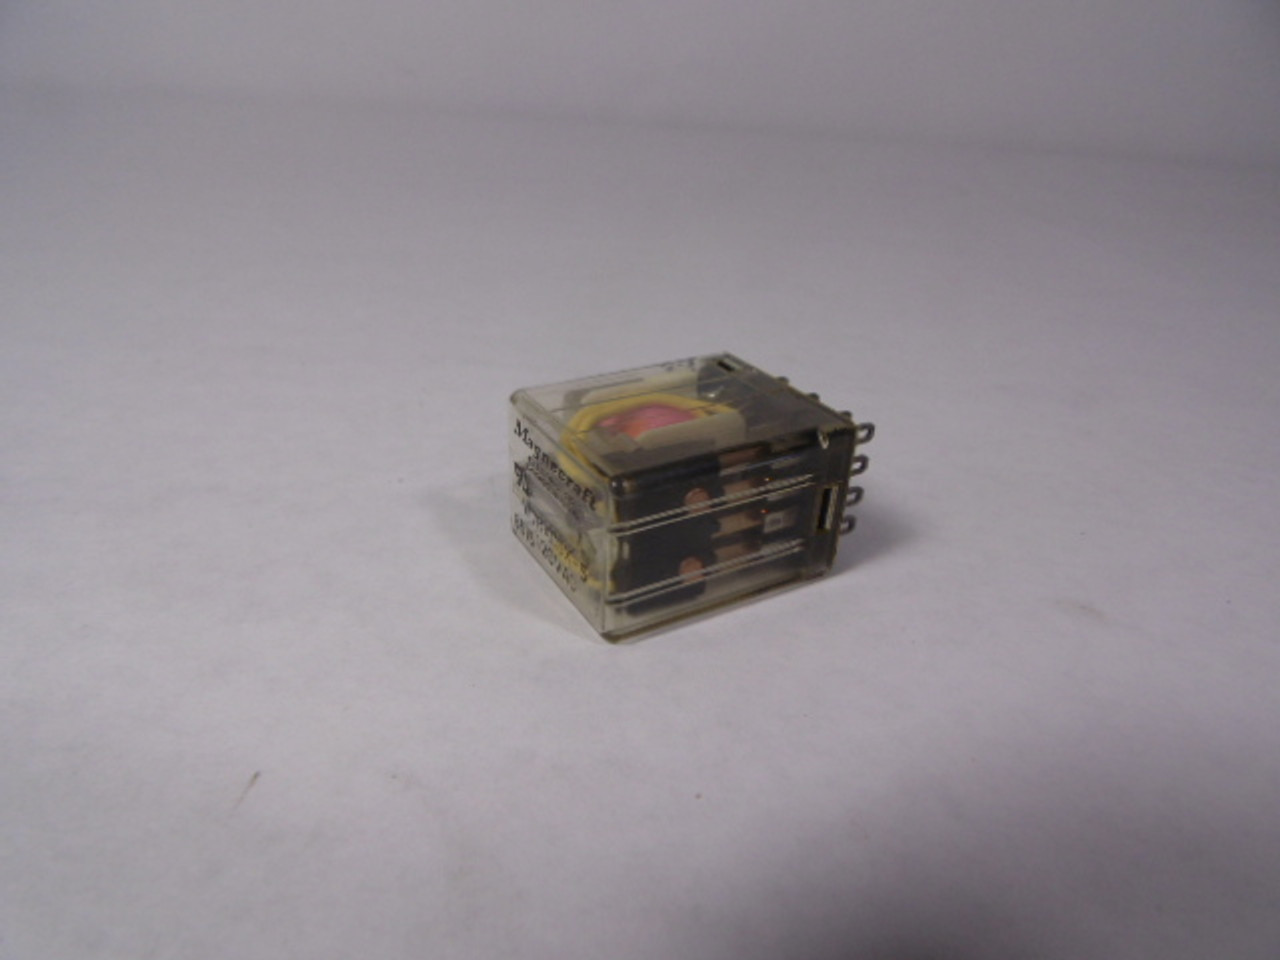 Magnecraft W78ACSX-5 Plug-In Relay 3amp 120VAC USED